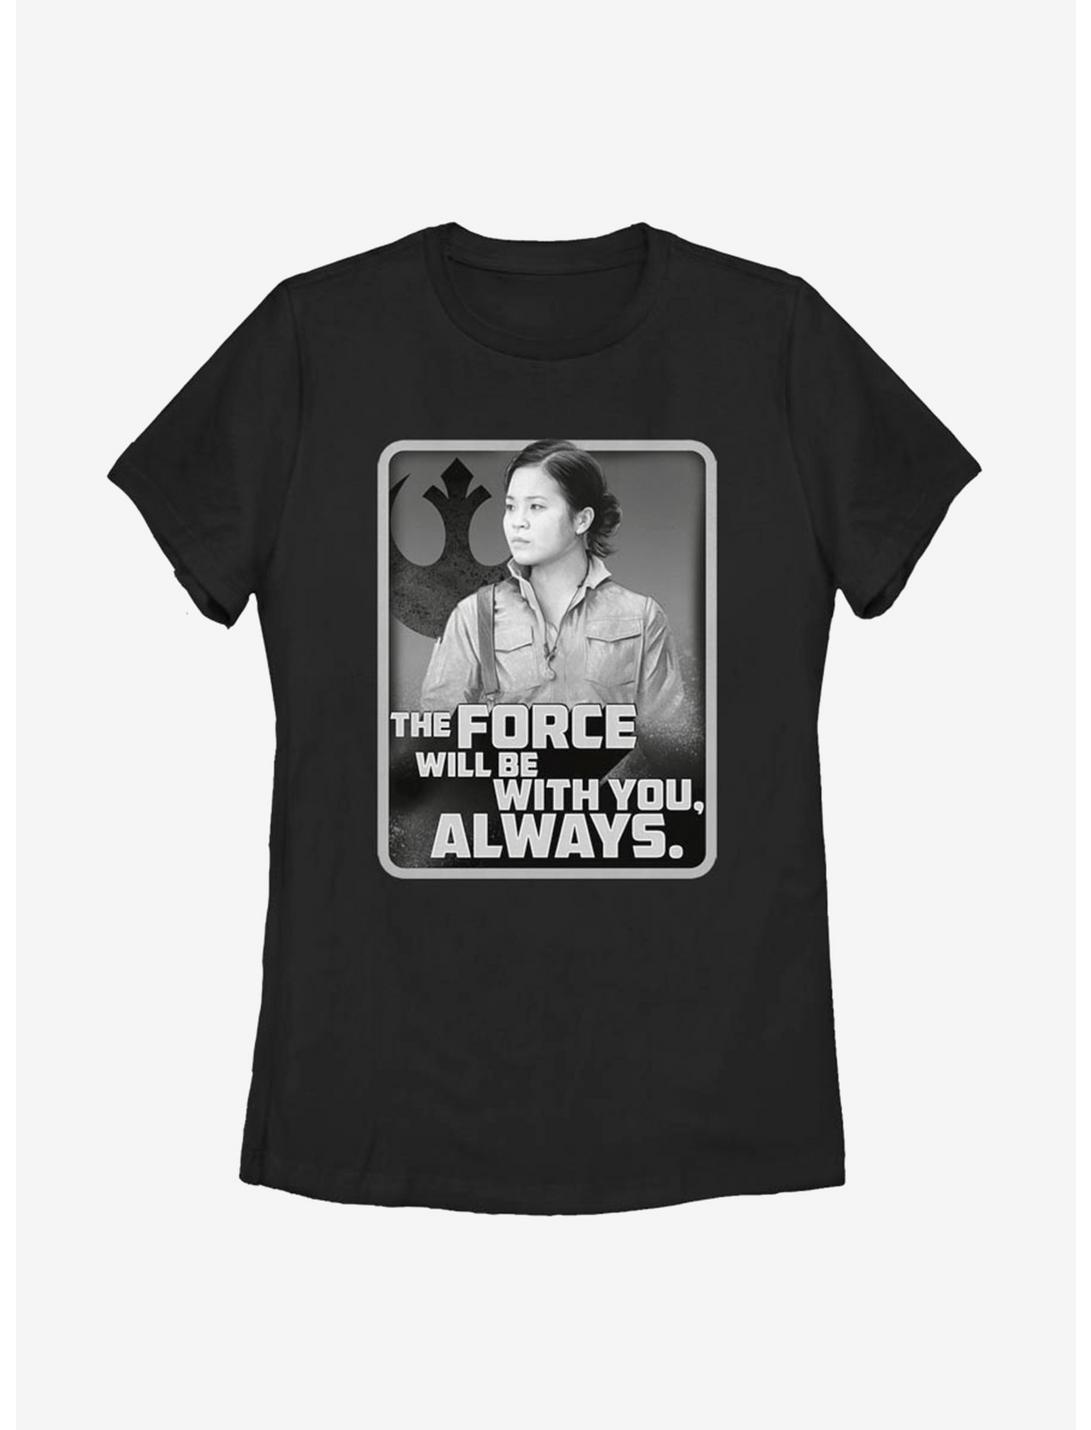 Star Wars Episode IX The Rise Of Skywalker With You Rose Womens T-Shirt, BLACK, hi-res